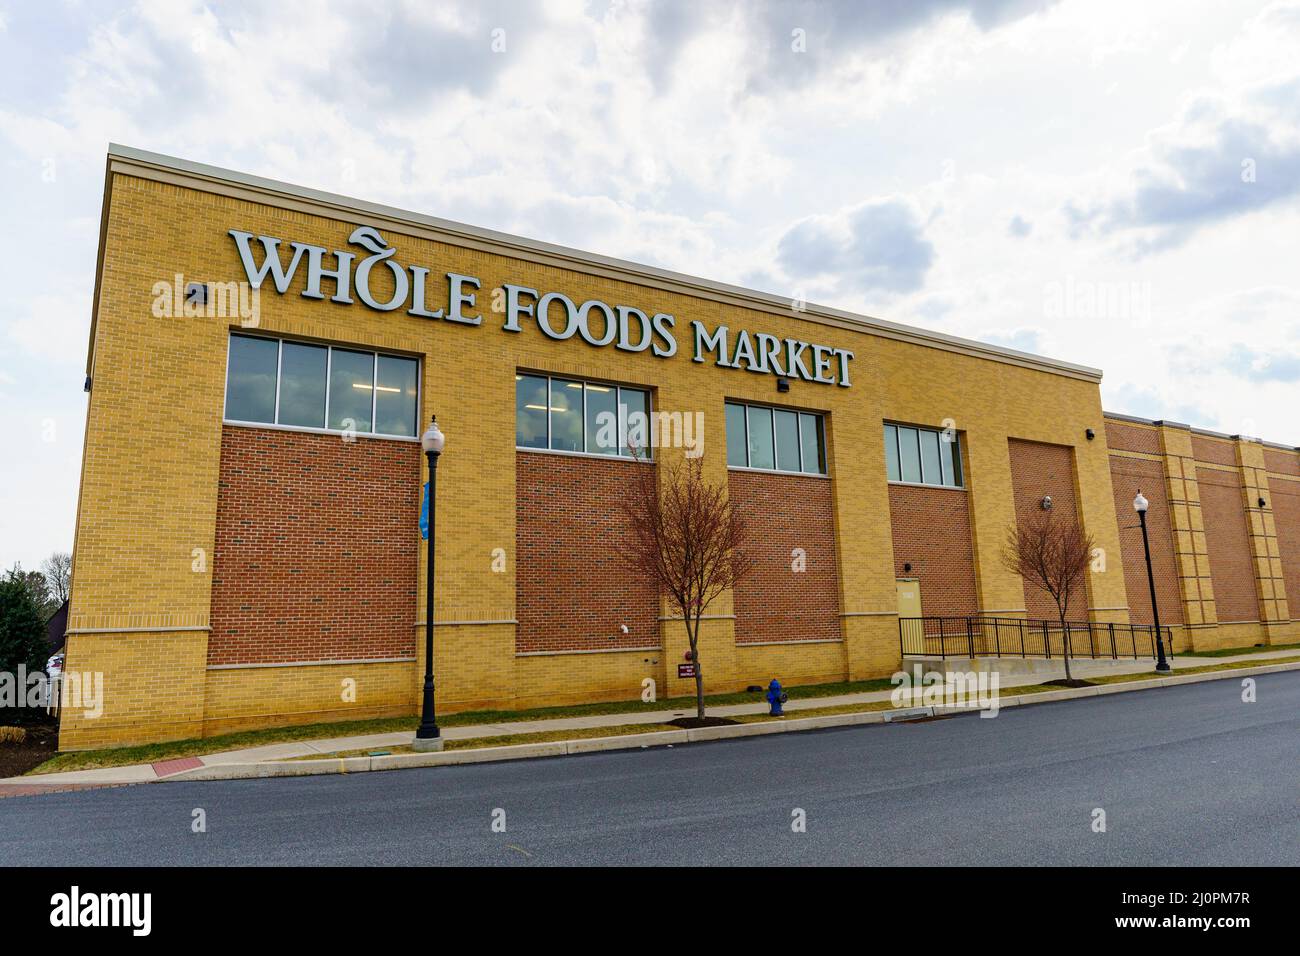 Lancaster, PA, USA - March 18, 2022: Exterior view of a Whole Foods Market. The grocery chain is a subsidiary of Amazon, and has over 500 locations, s Stock Photo